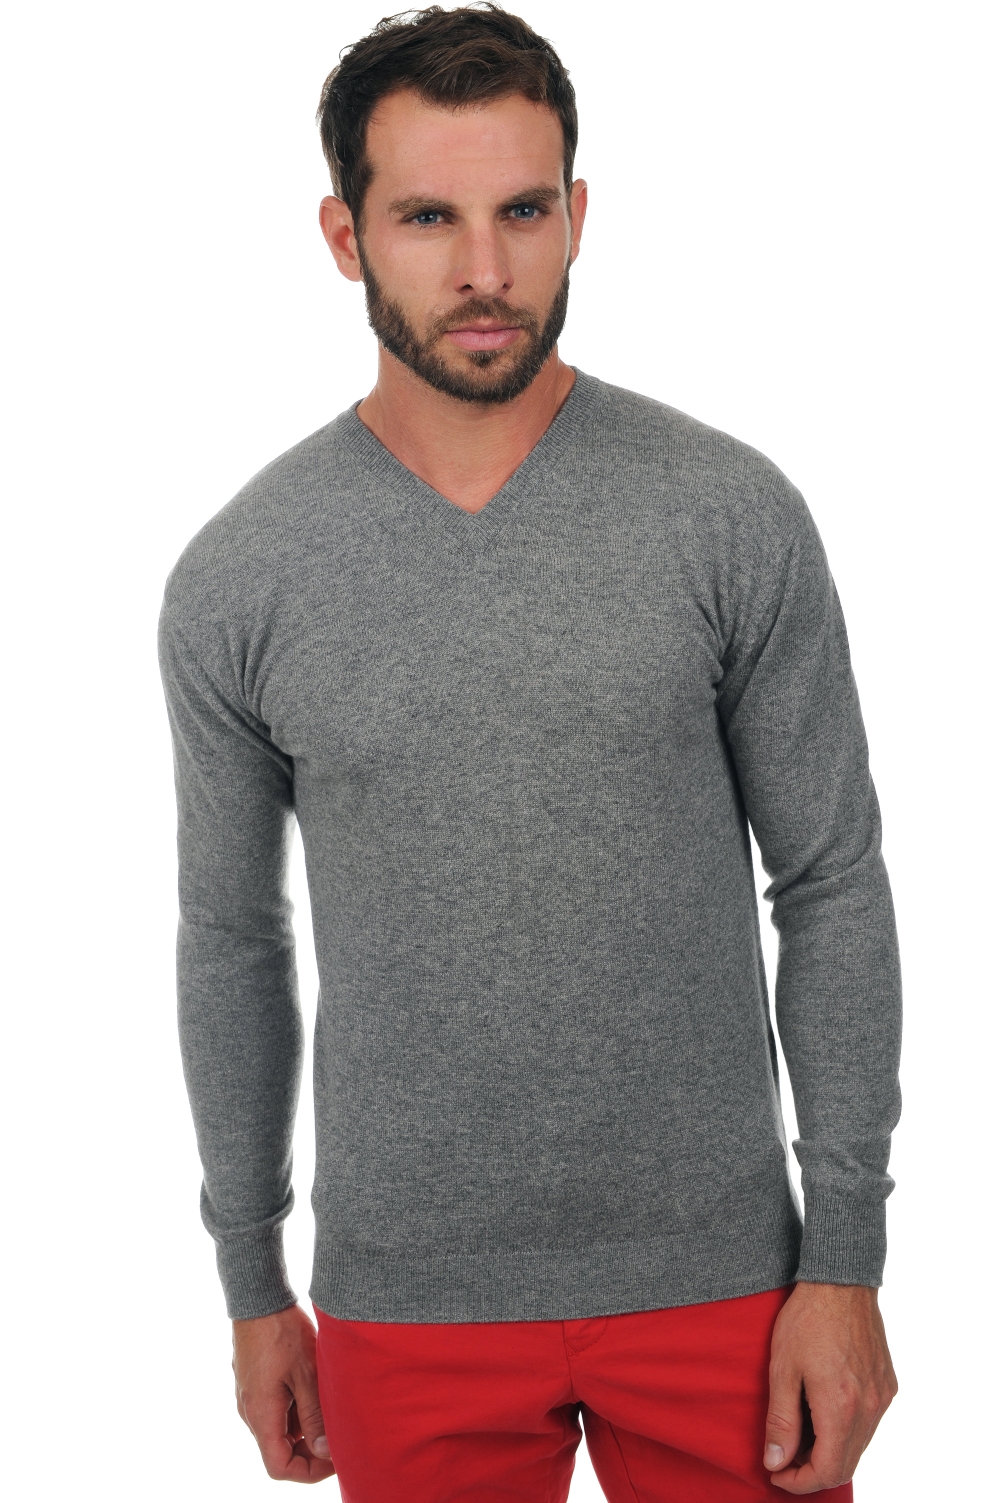 Cachemire pull homme col v maddox gris chine 4xl